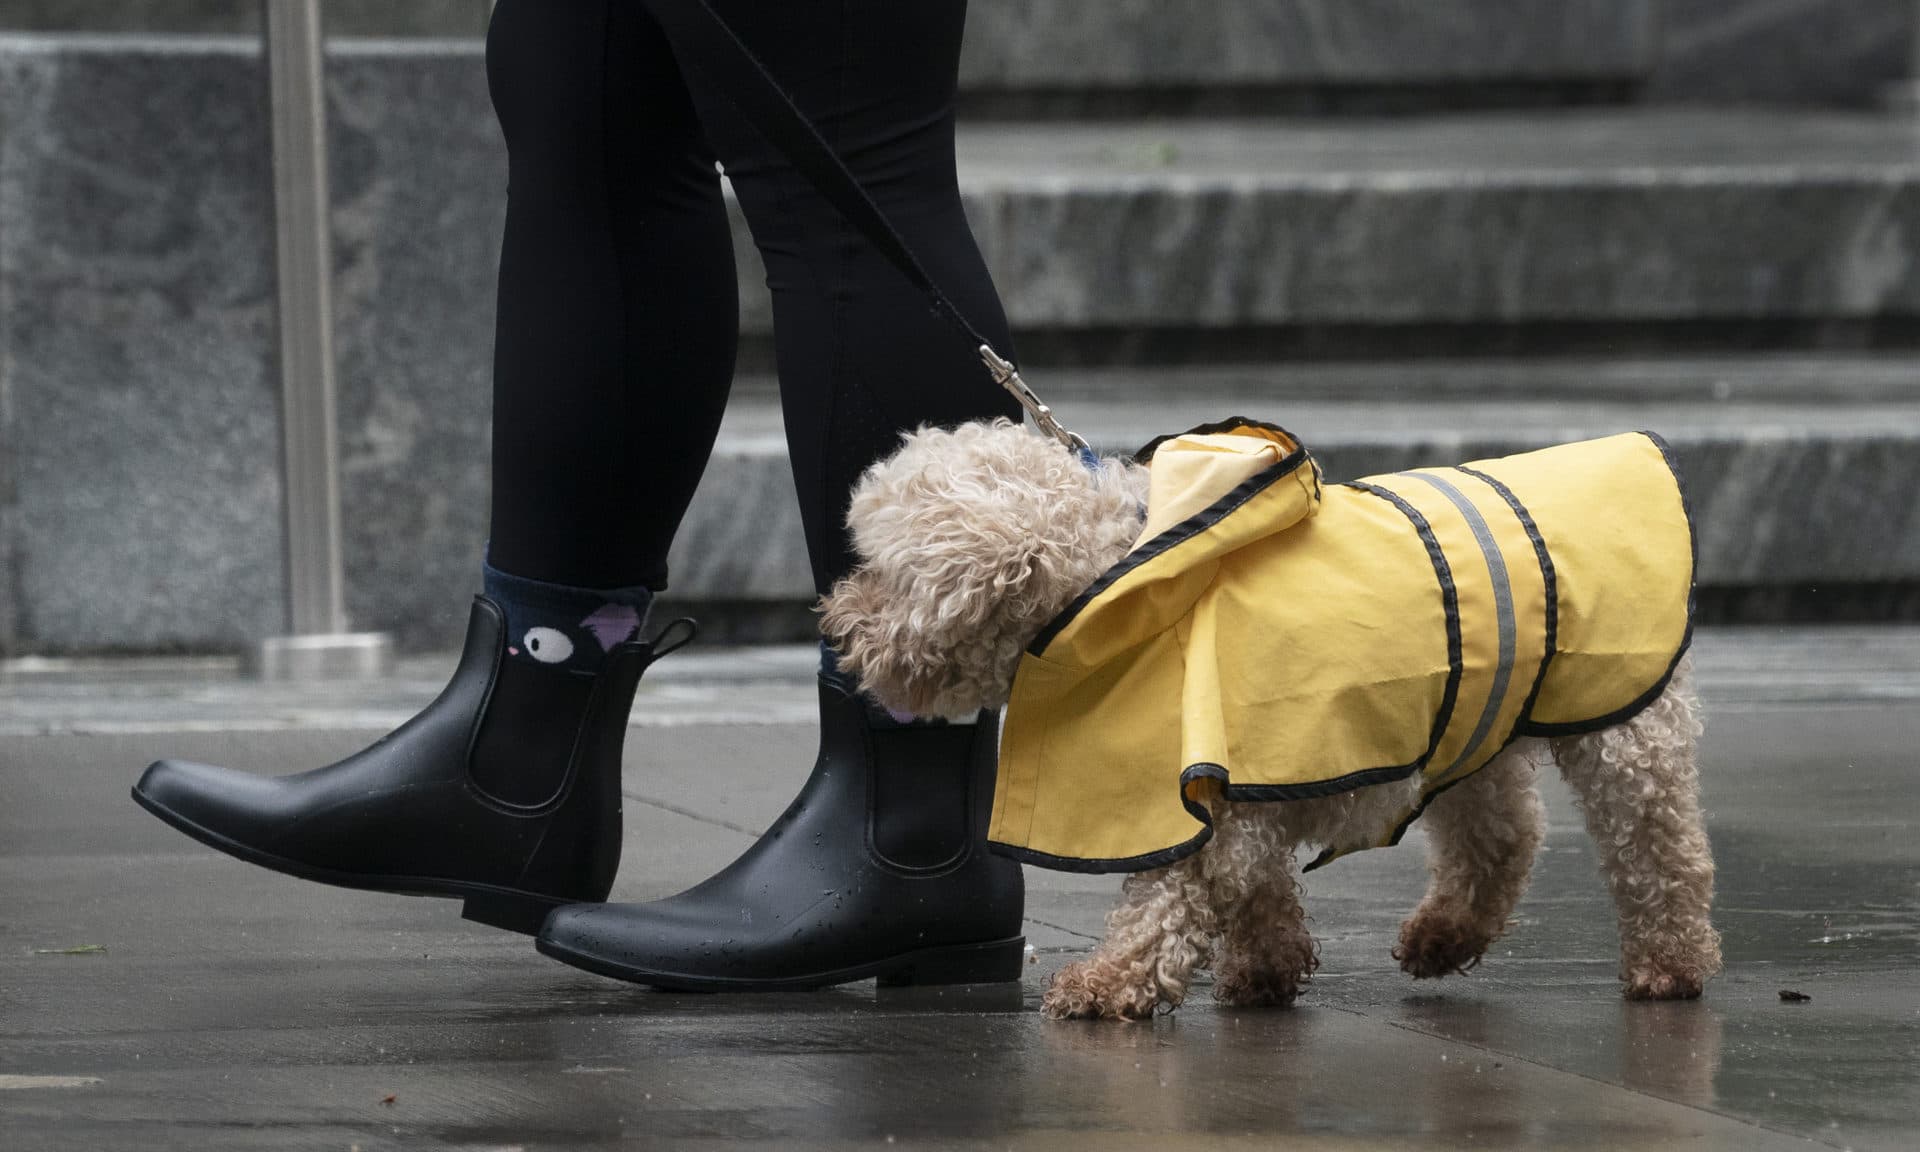 A woman walks her dog in the rain, Friday, July 9, 2021 in New York. Fast-moving Tropical Storm Elsa hit the New York City region with torrential rains and high winds as it churned up the East Coast. (Mark Lennihan/AP)